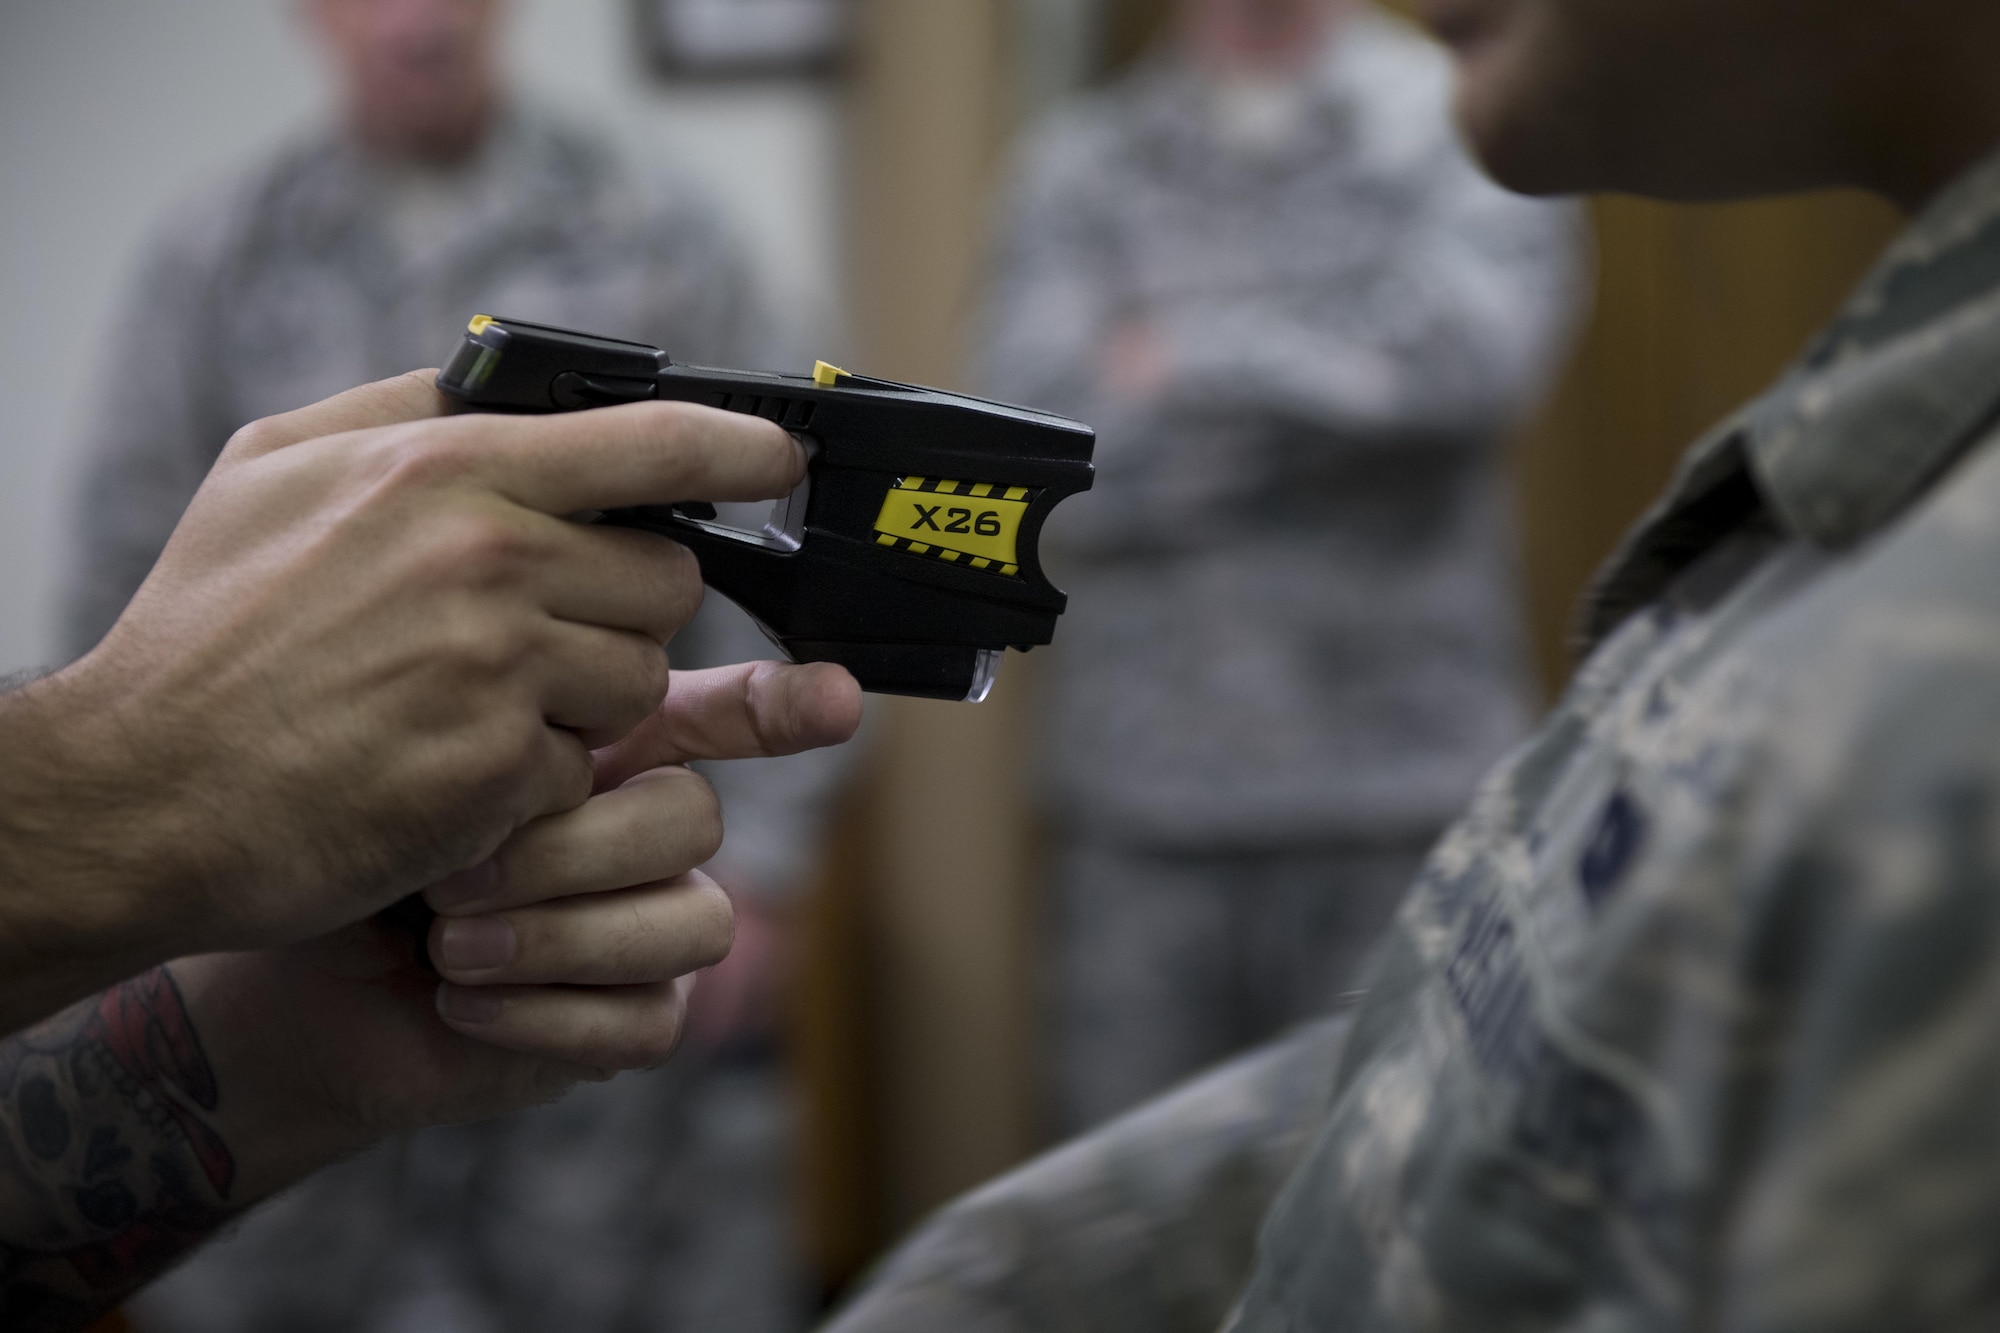 A 374th Security Forces Squadron member pulls away after experiencing a “drive tase,” during a nonlethal weapons demonstration March 15, 2017, at Yokota Air Base, Japan. A drive tase is when the taser is directly applied to the body of an individual. (U.S. Air Force photo by Airman 1st Class Donald Hudson)